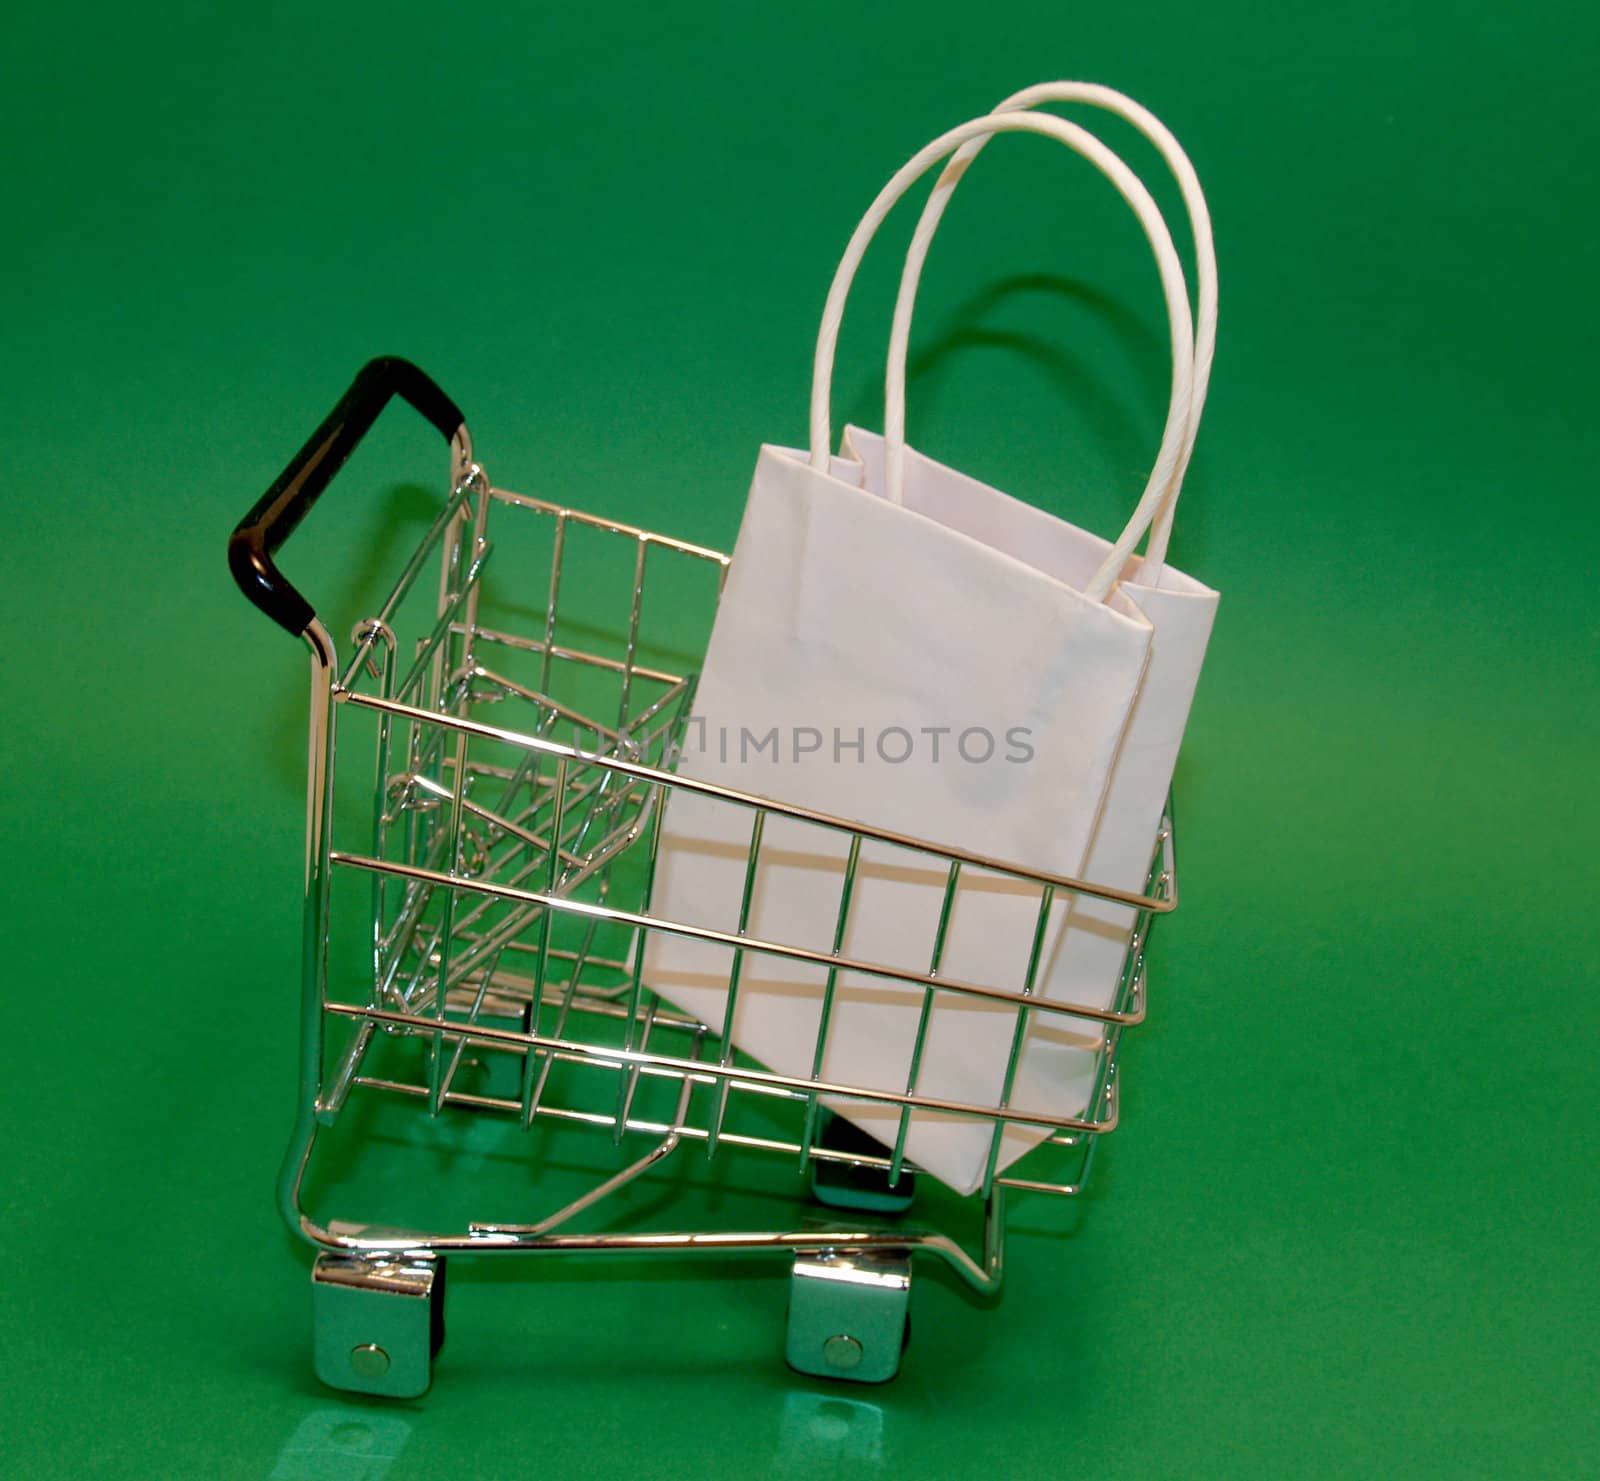 Shopping cart with bag